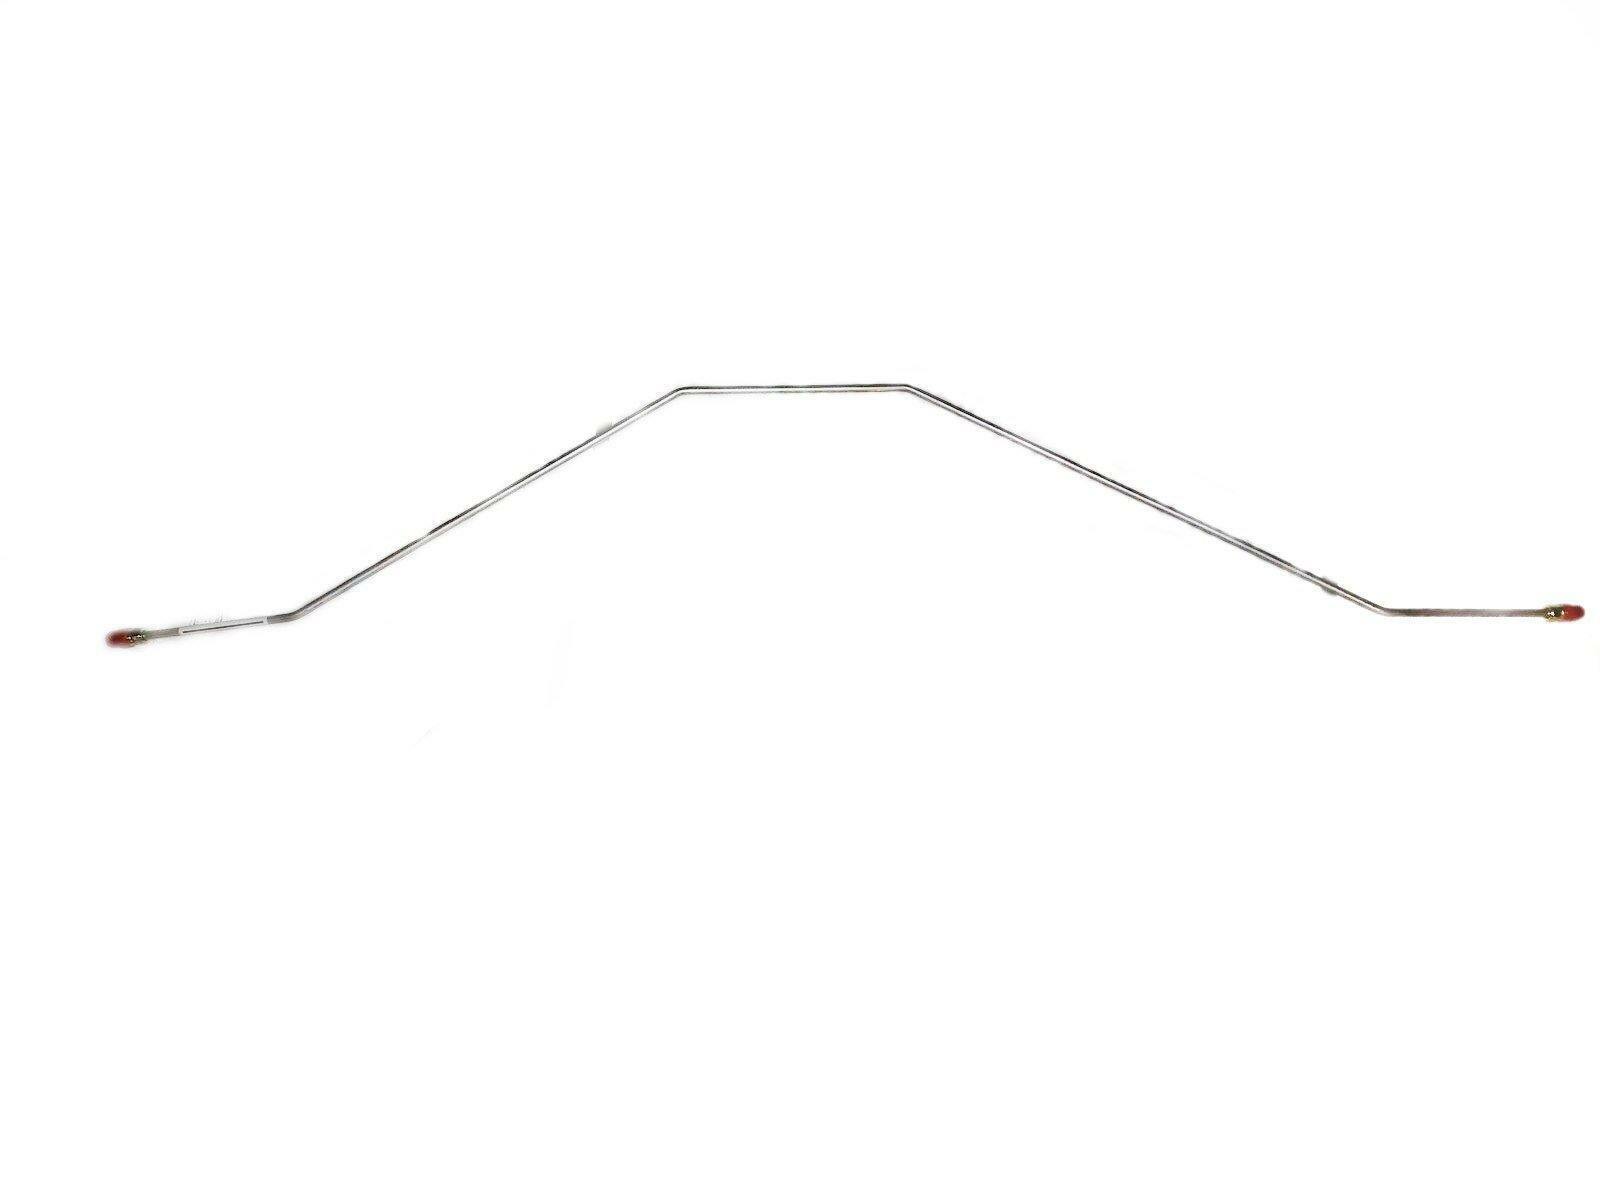 For Ford E-350 Club Wagon 1997-2000 Rear Axle Brake Lines 1 Line-IRA0001SS-CPP